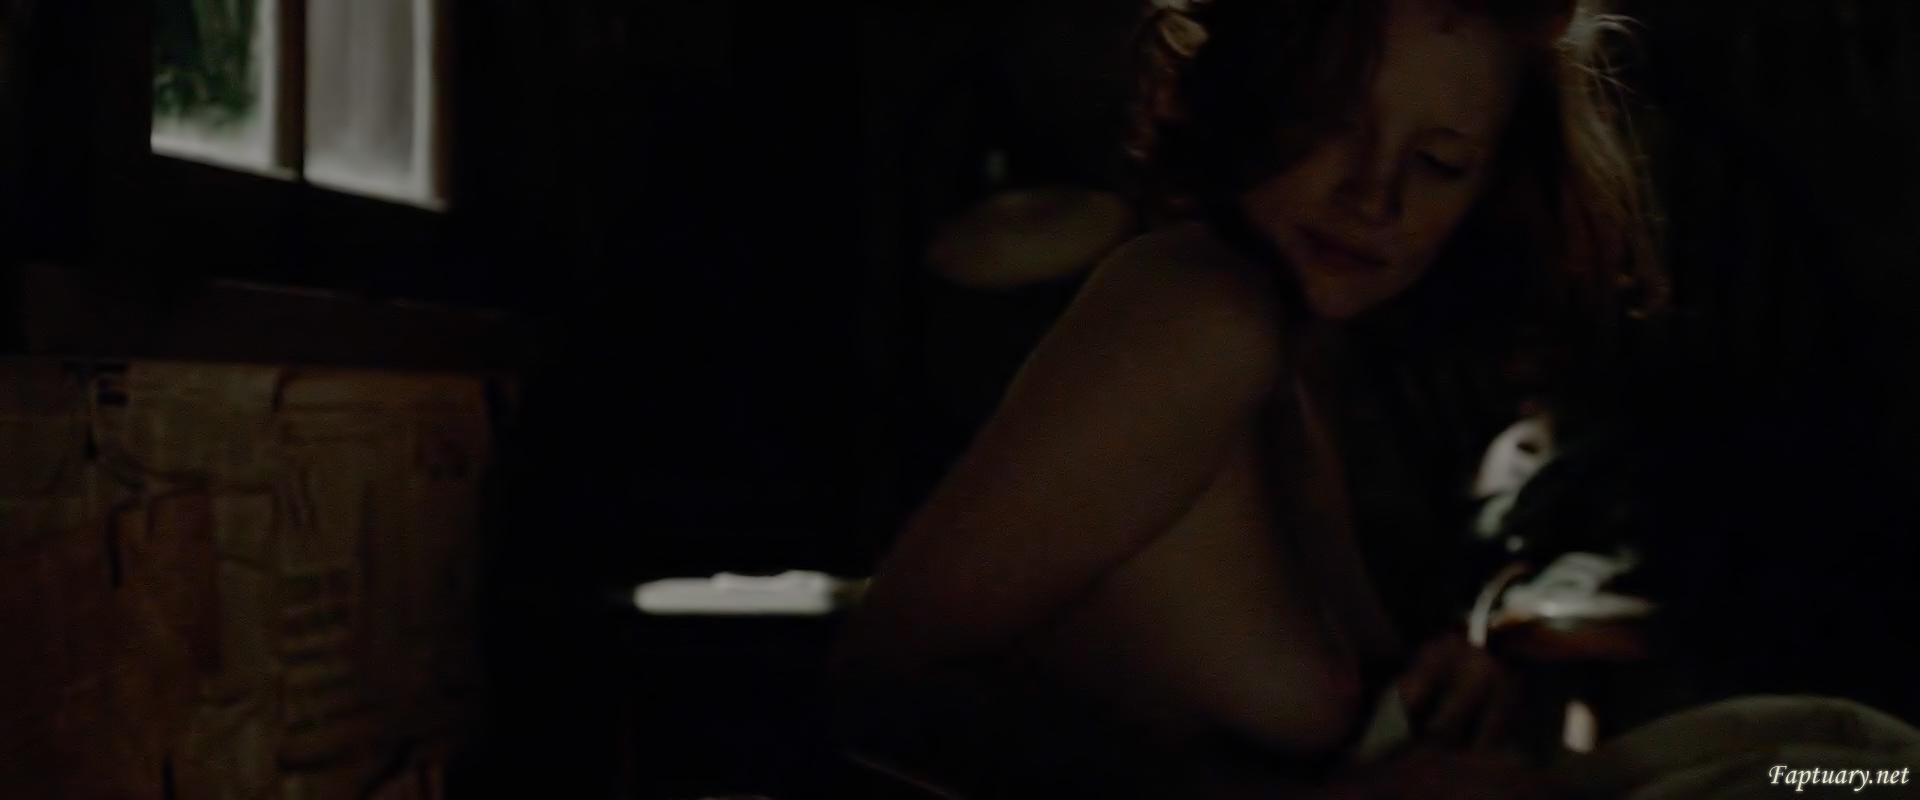 Naked Jessica Chastain In Lawless